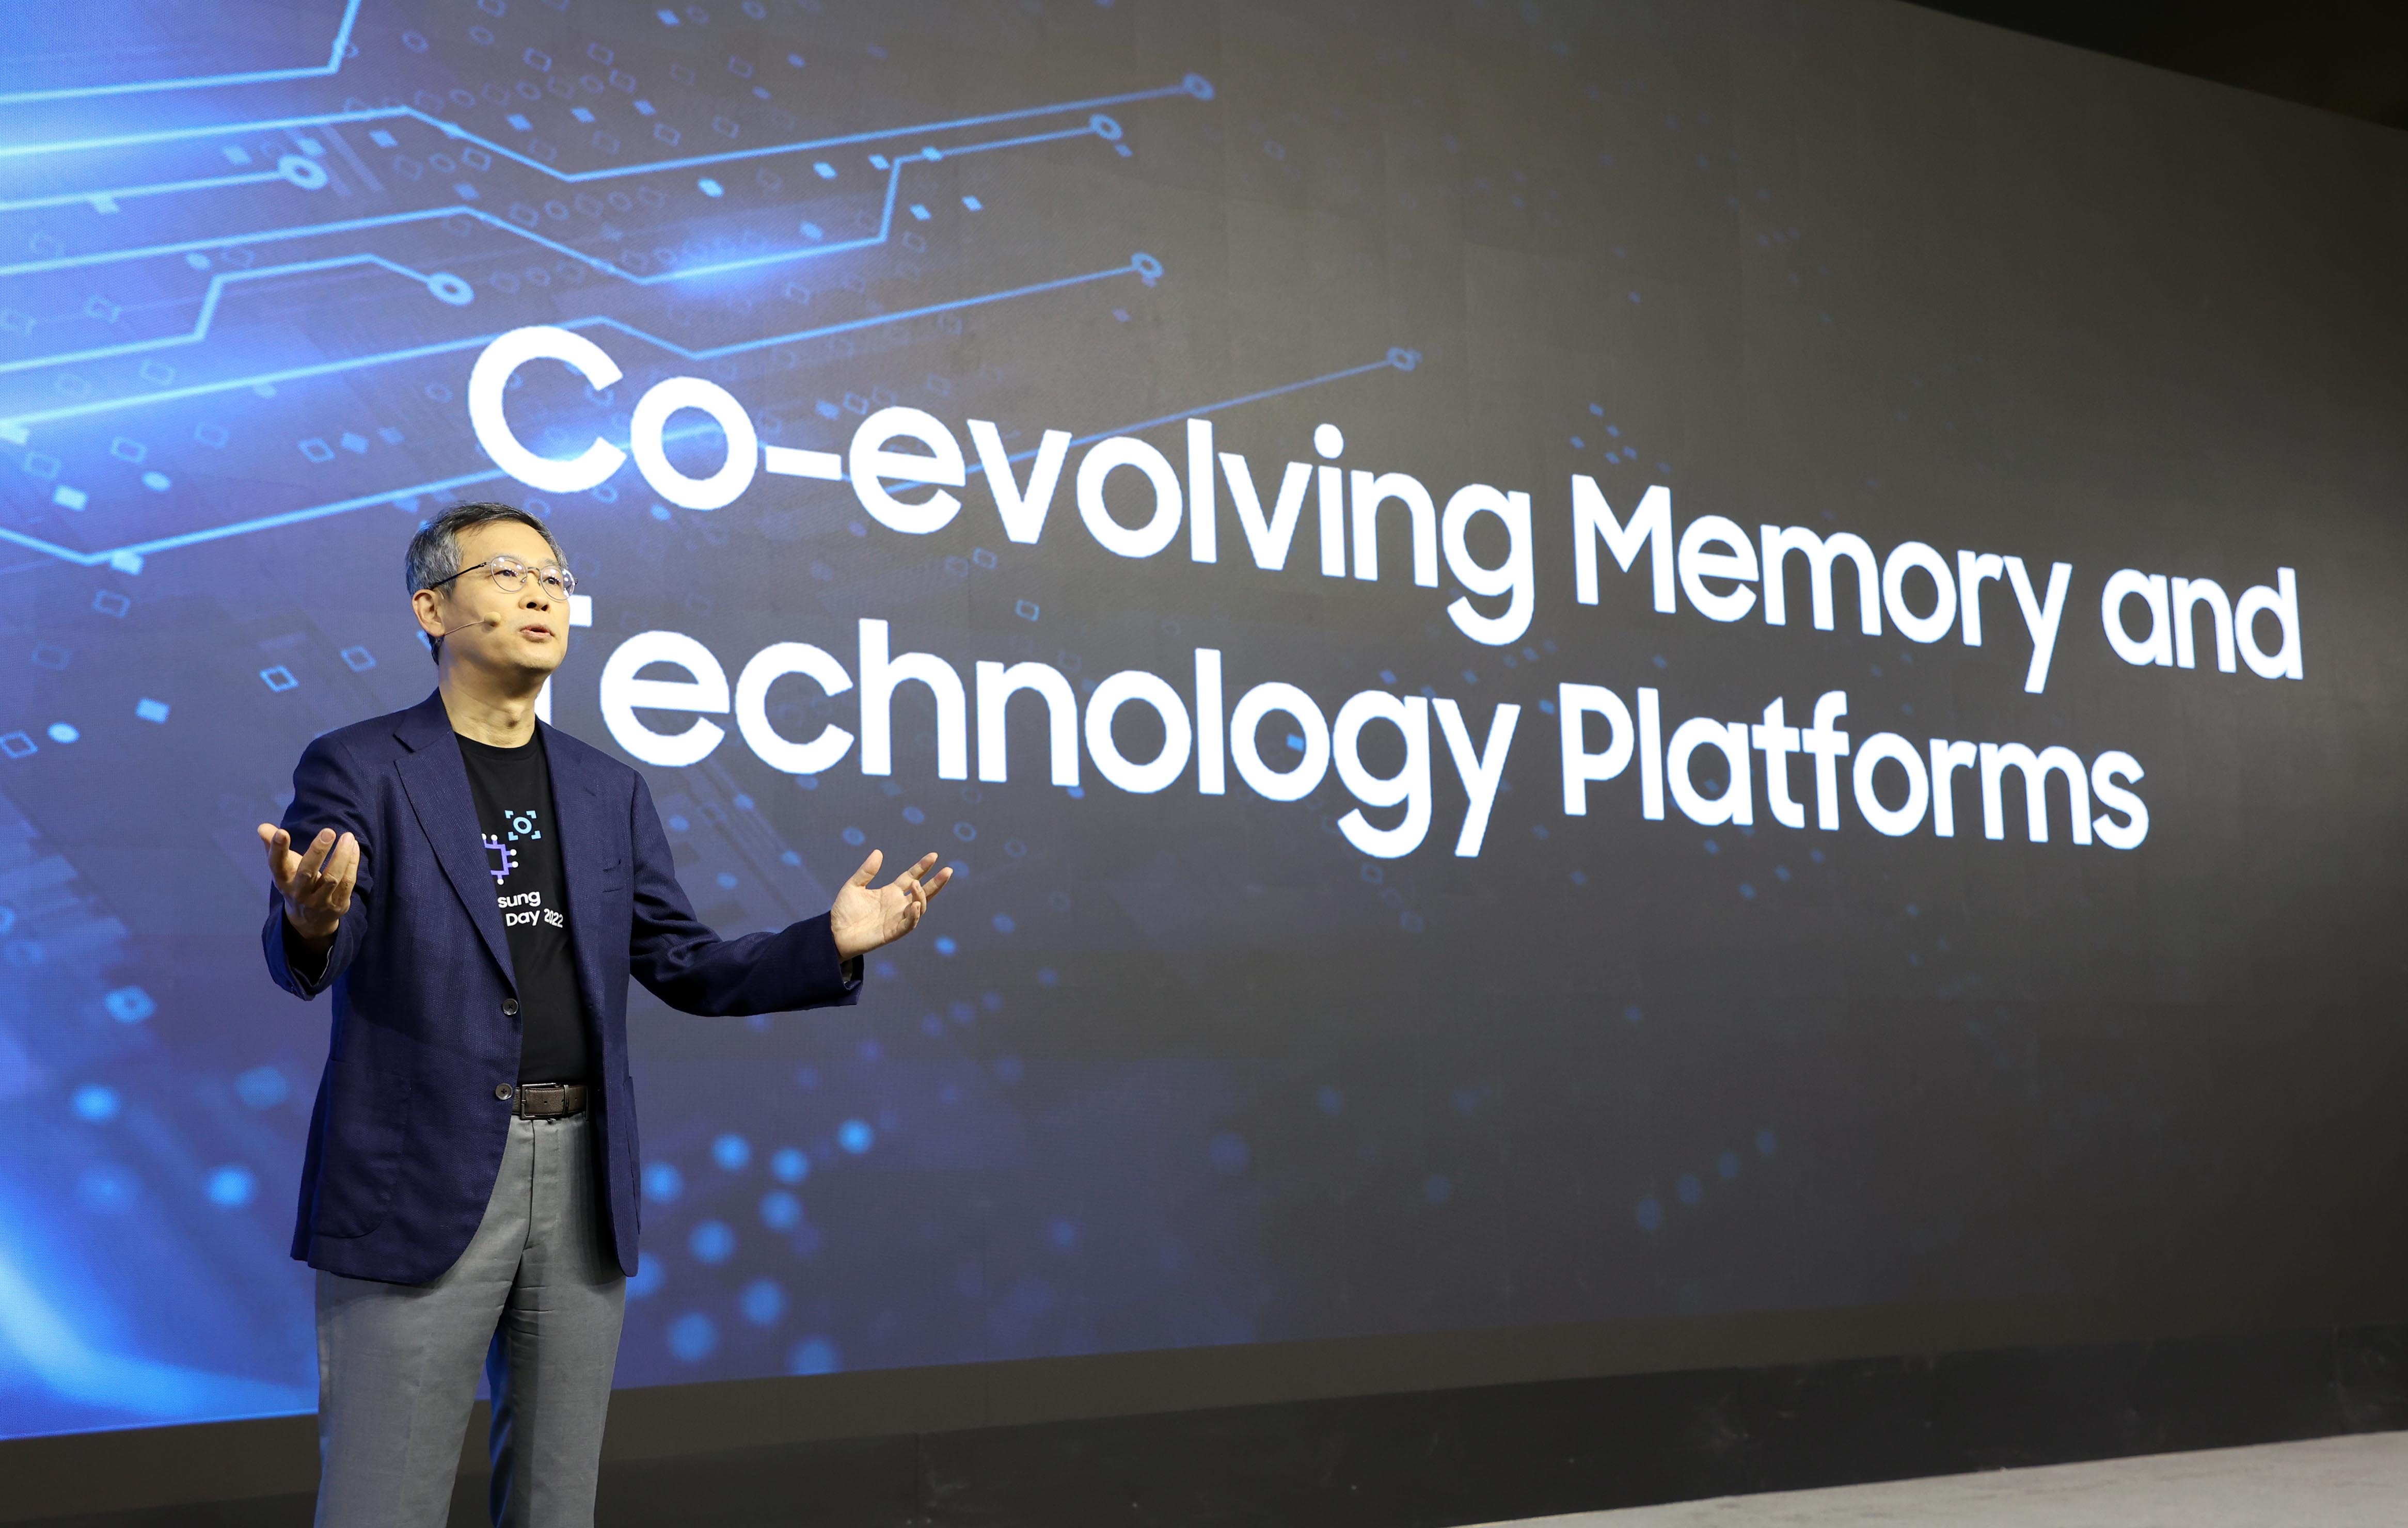 Jung-bae Lee, President and Head of Memory Business, is giving his keynote speech at Samsung Tech Day 2022.